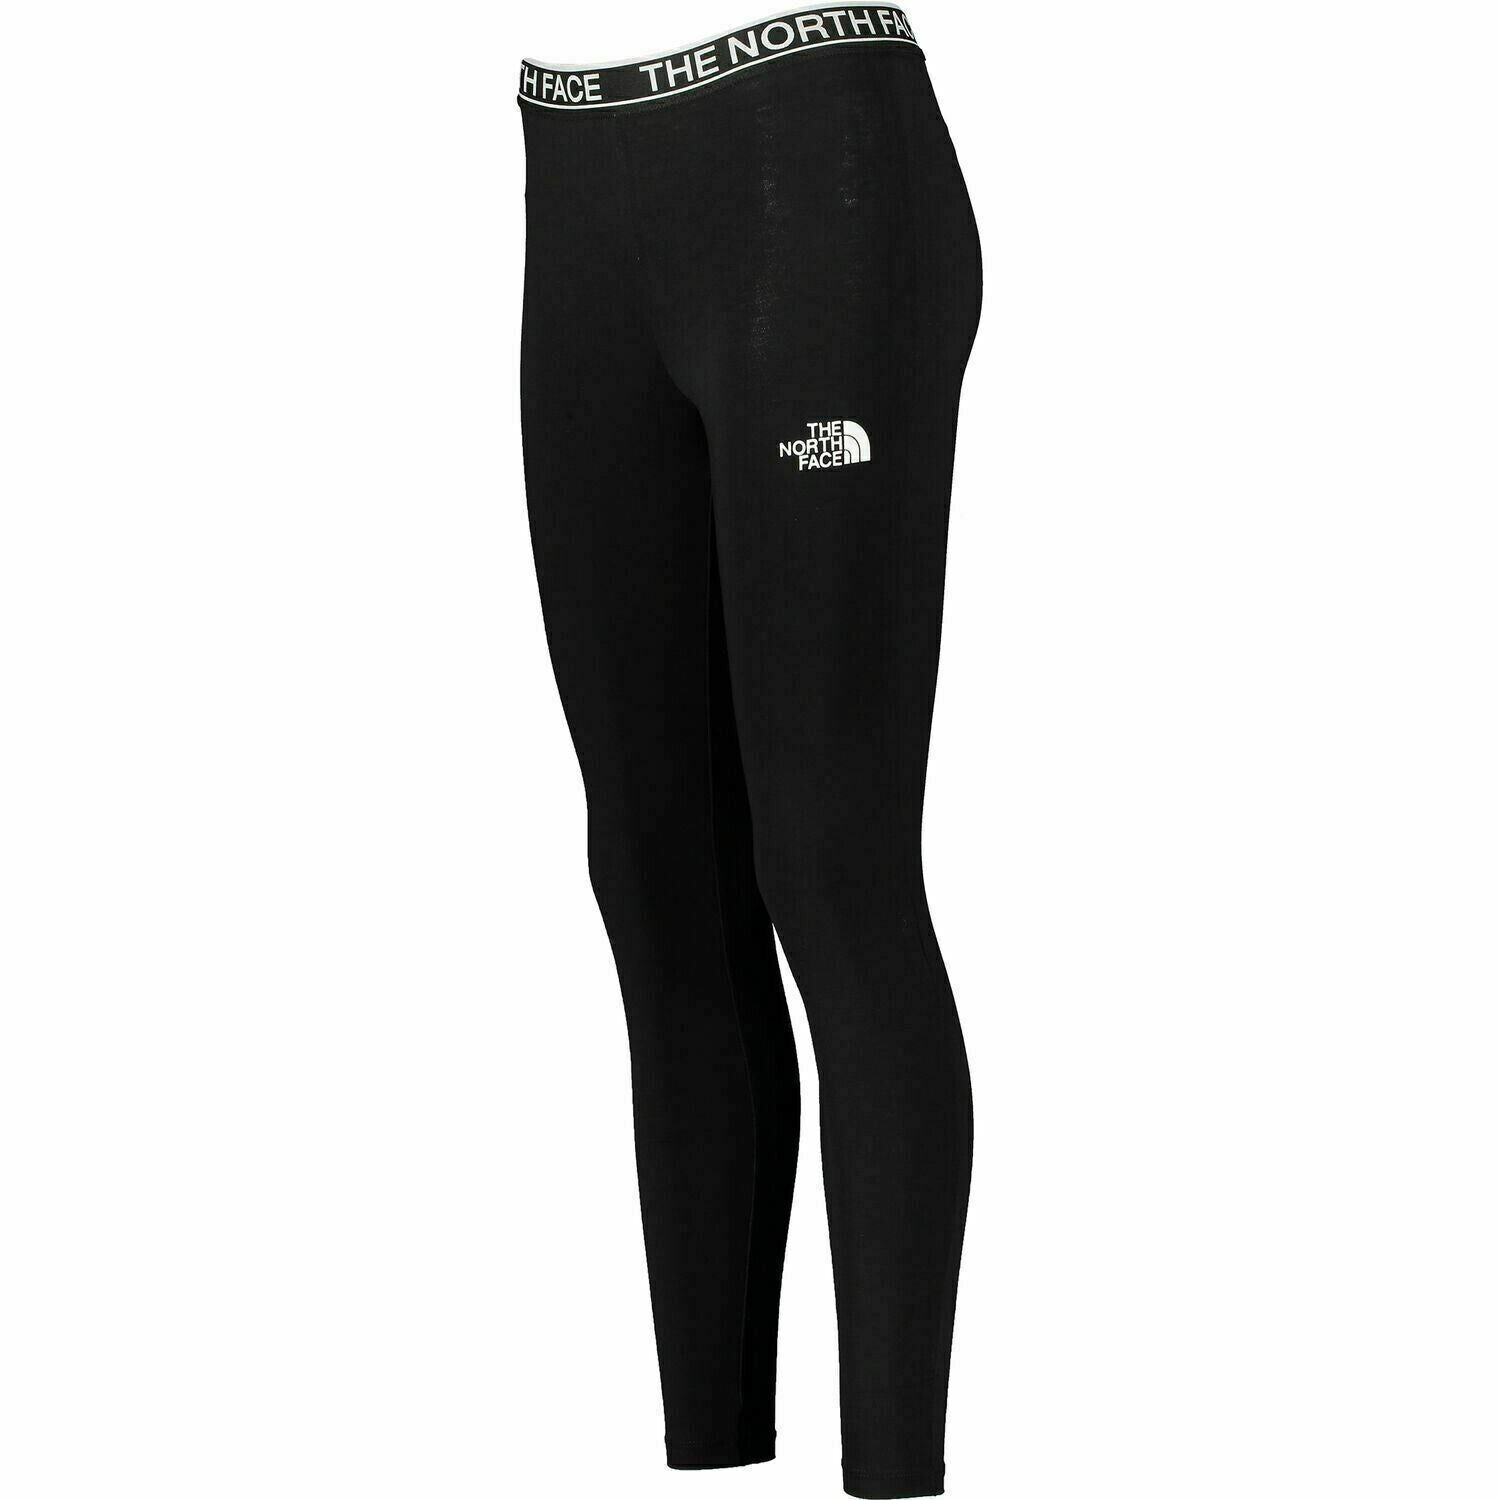 THE NORTH FACE Womens Black Cotton Jersey Leggings, size SMALL